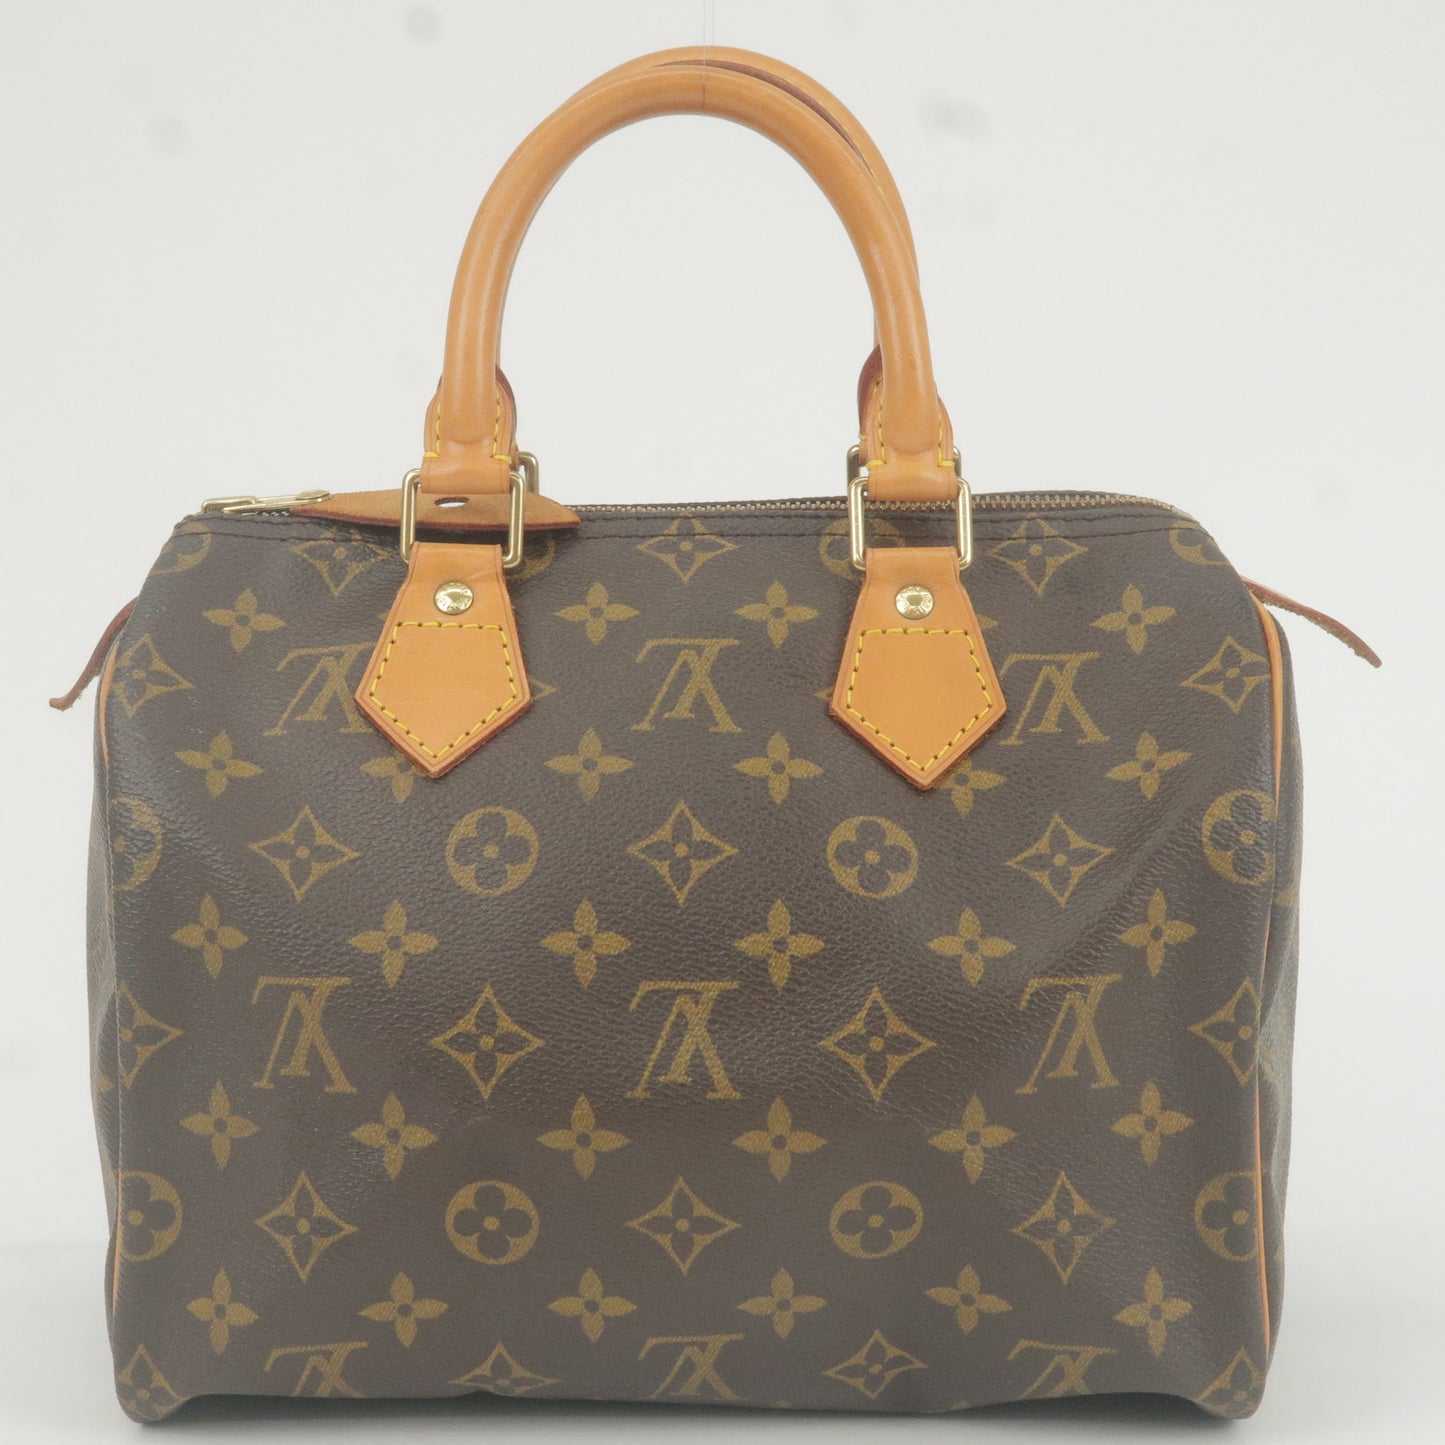 New Speedy 25 Just Delivered. Scratches on lock normal? : r/Louisvuitton